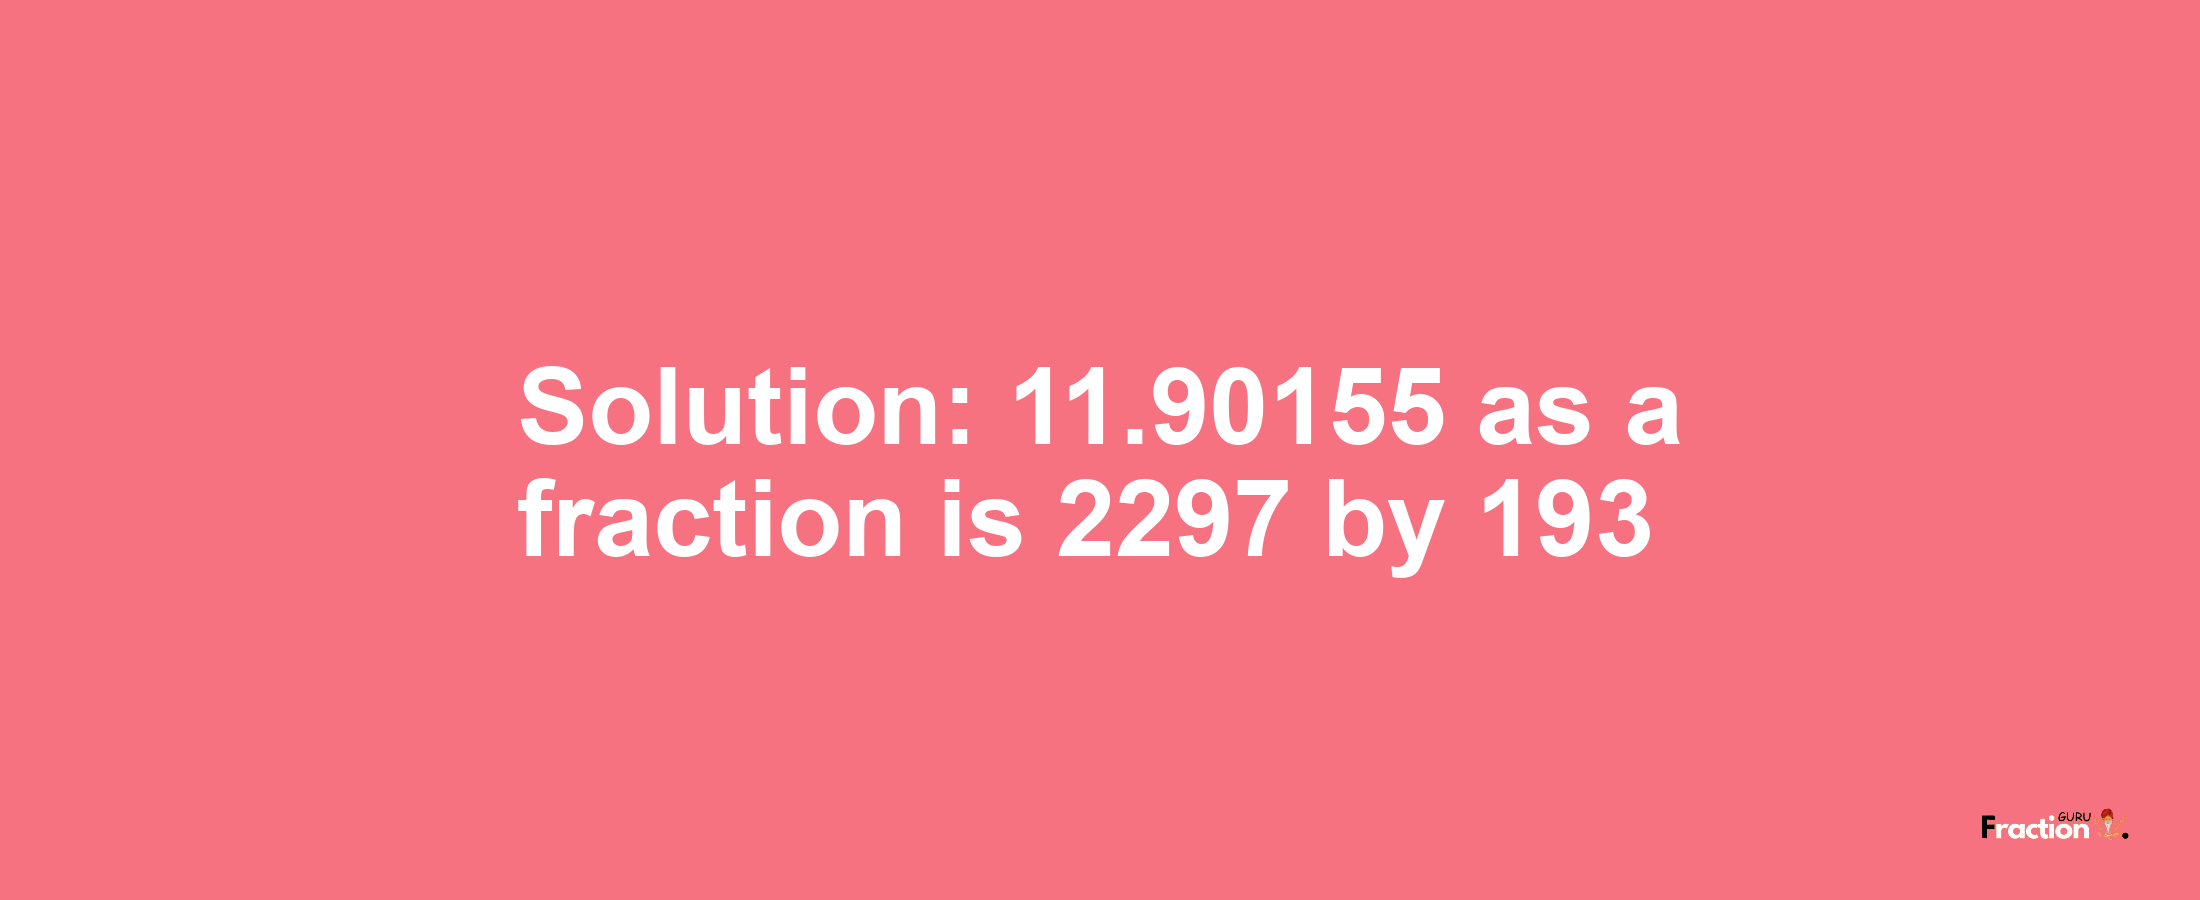 Solution:11.90155 as a fraction is 2297/193